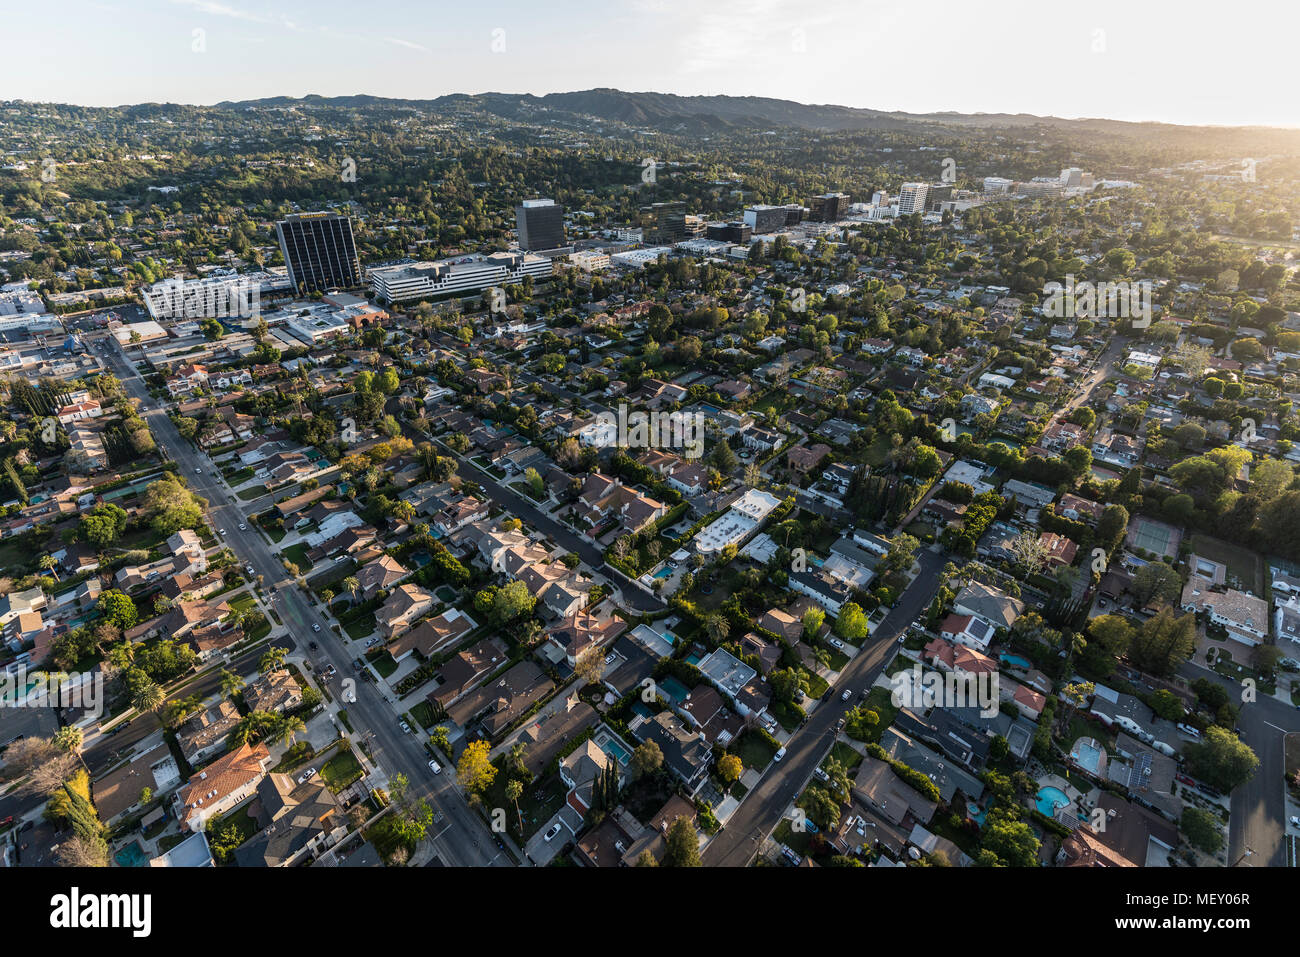 Los Angeles, California, USA - April 18, 2018:  Afternoon aerial view of Sherman Oaks and Encino in the San Fernando Valley. Stock Photo